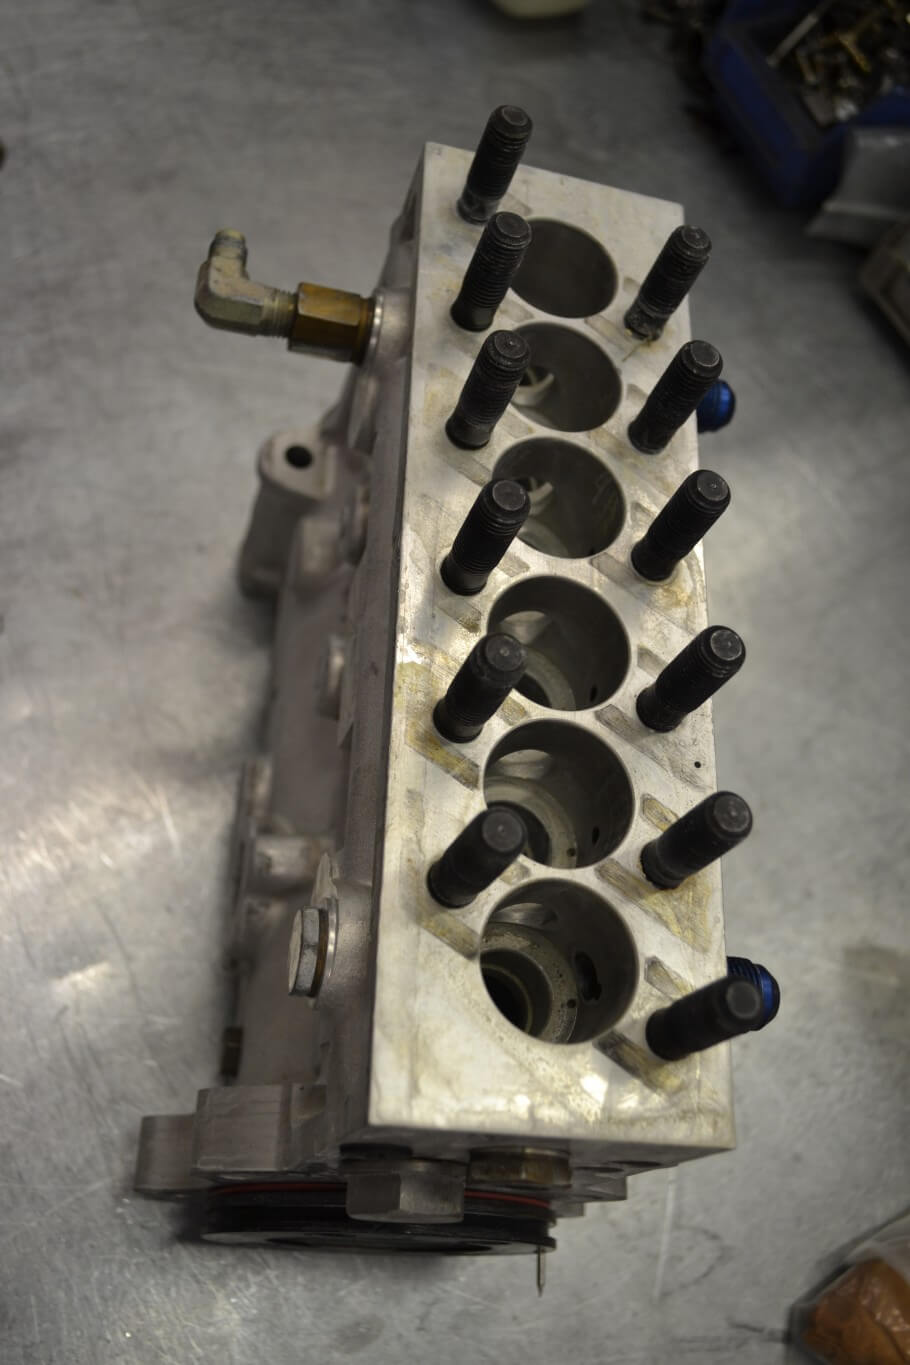 2. Before a 16mm pump can be built, the core pump must be torn down to its foundation and machined to accept a number of new parts and pieces from Scheid Diesel.